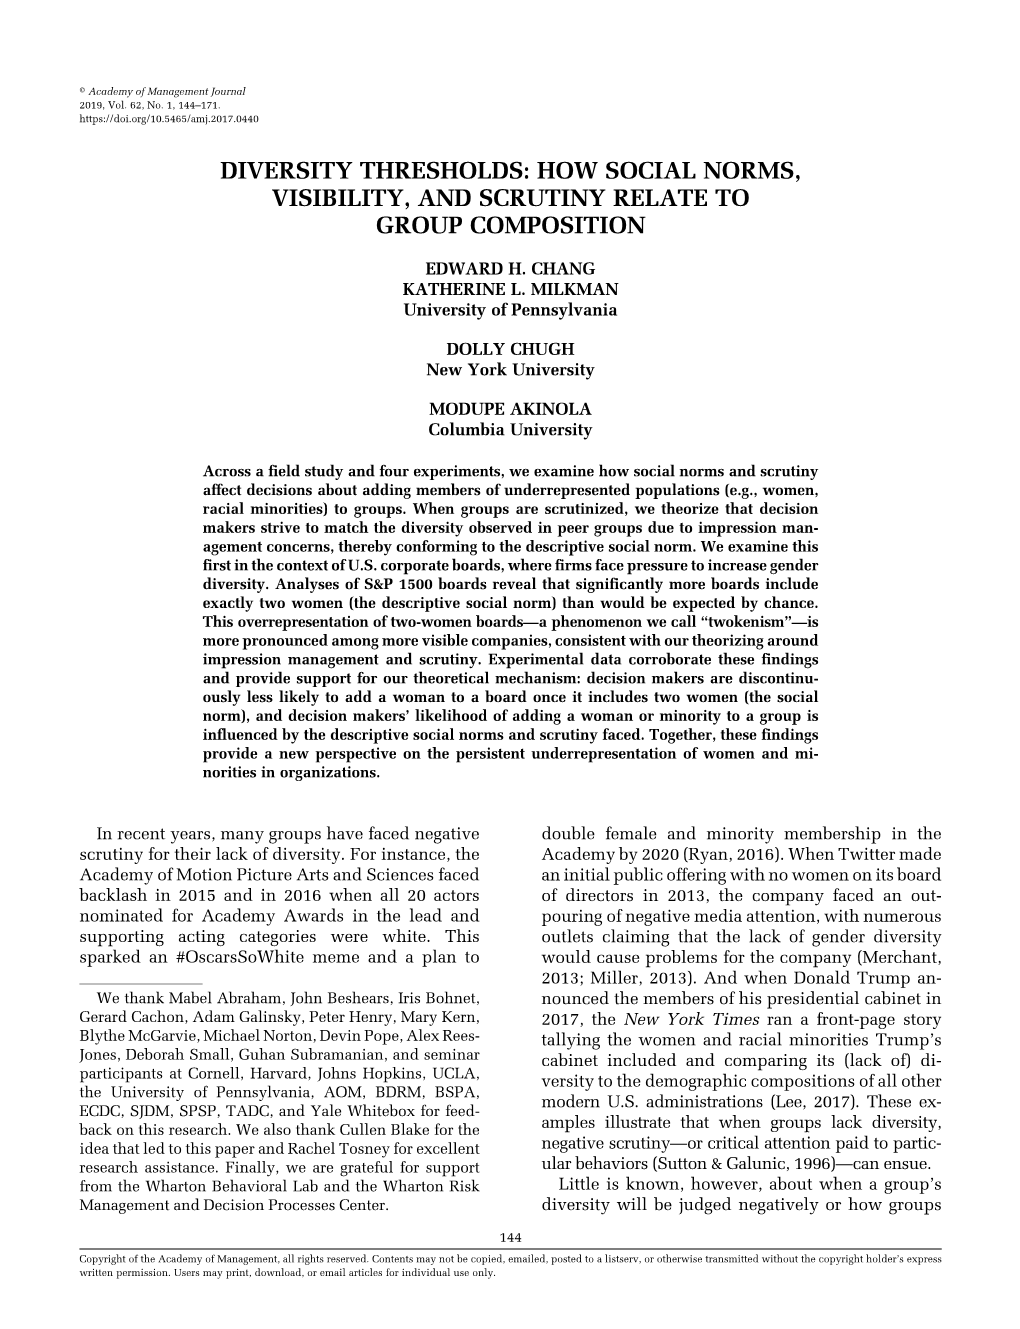 Diversity Thresholds: How Social Norms, Visibility, and Scrutiny Relate to Group Composition